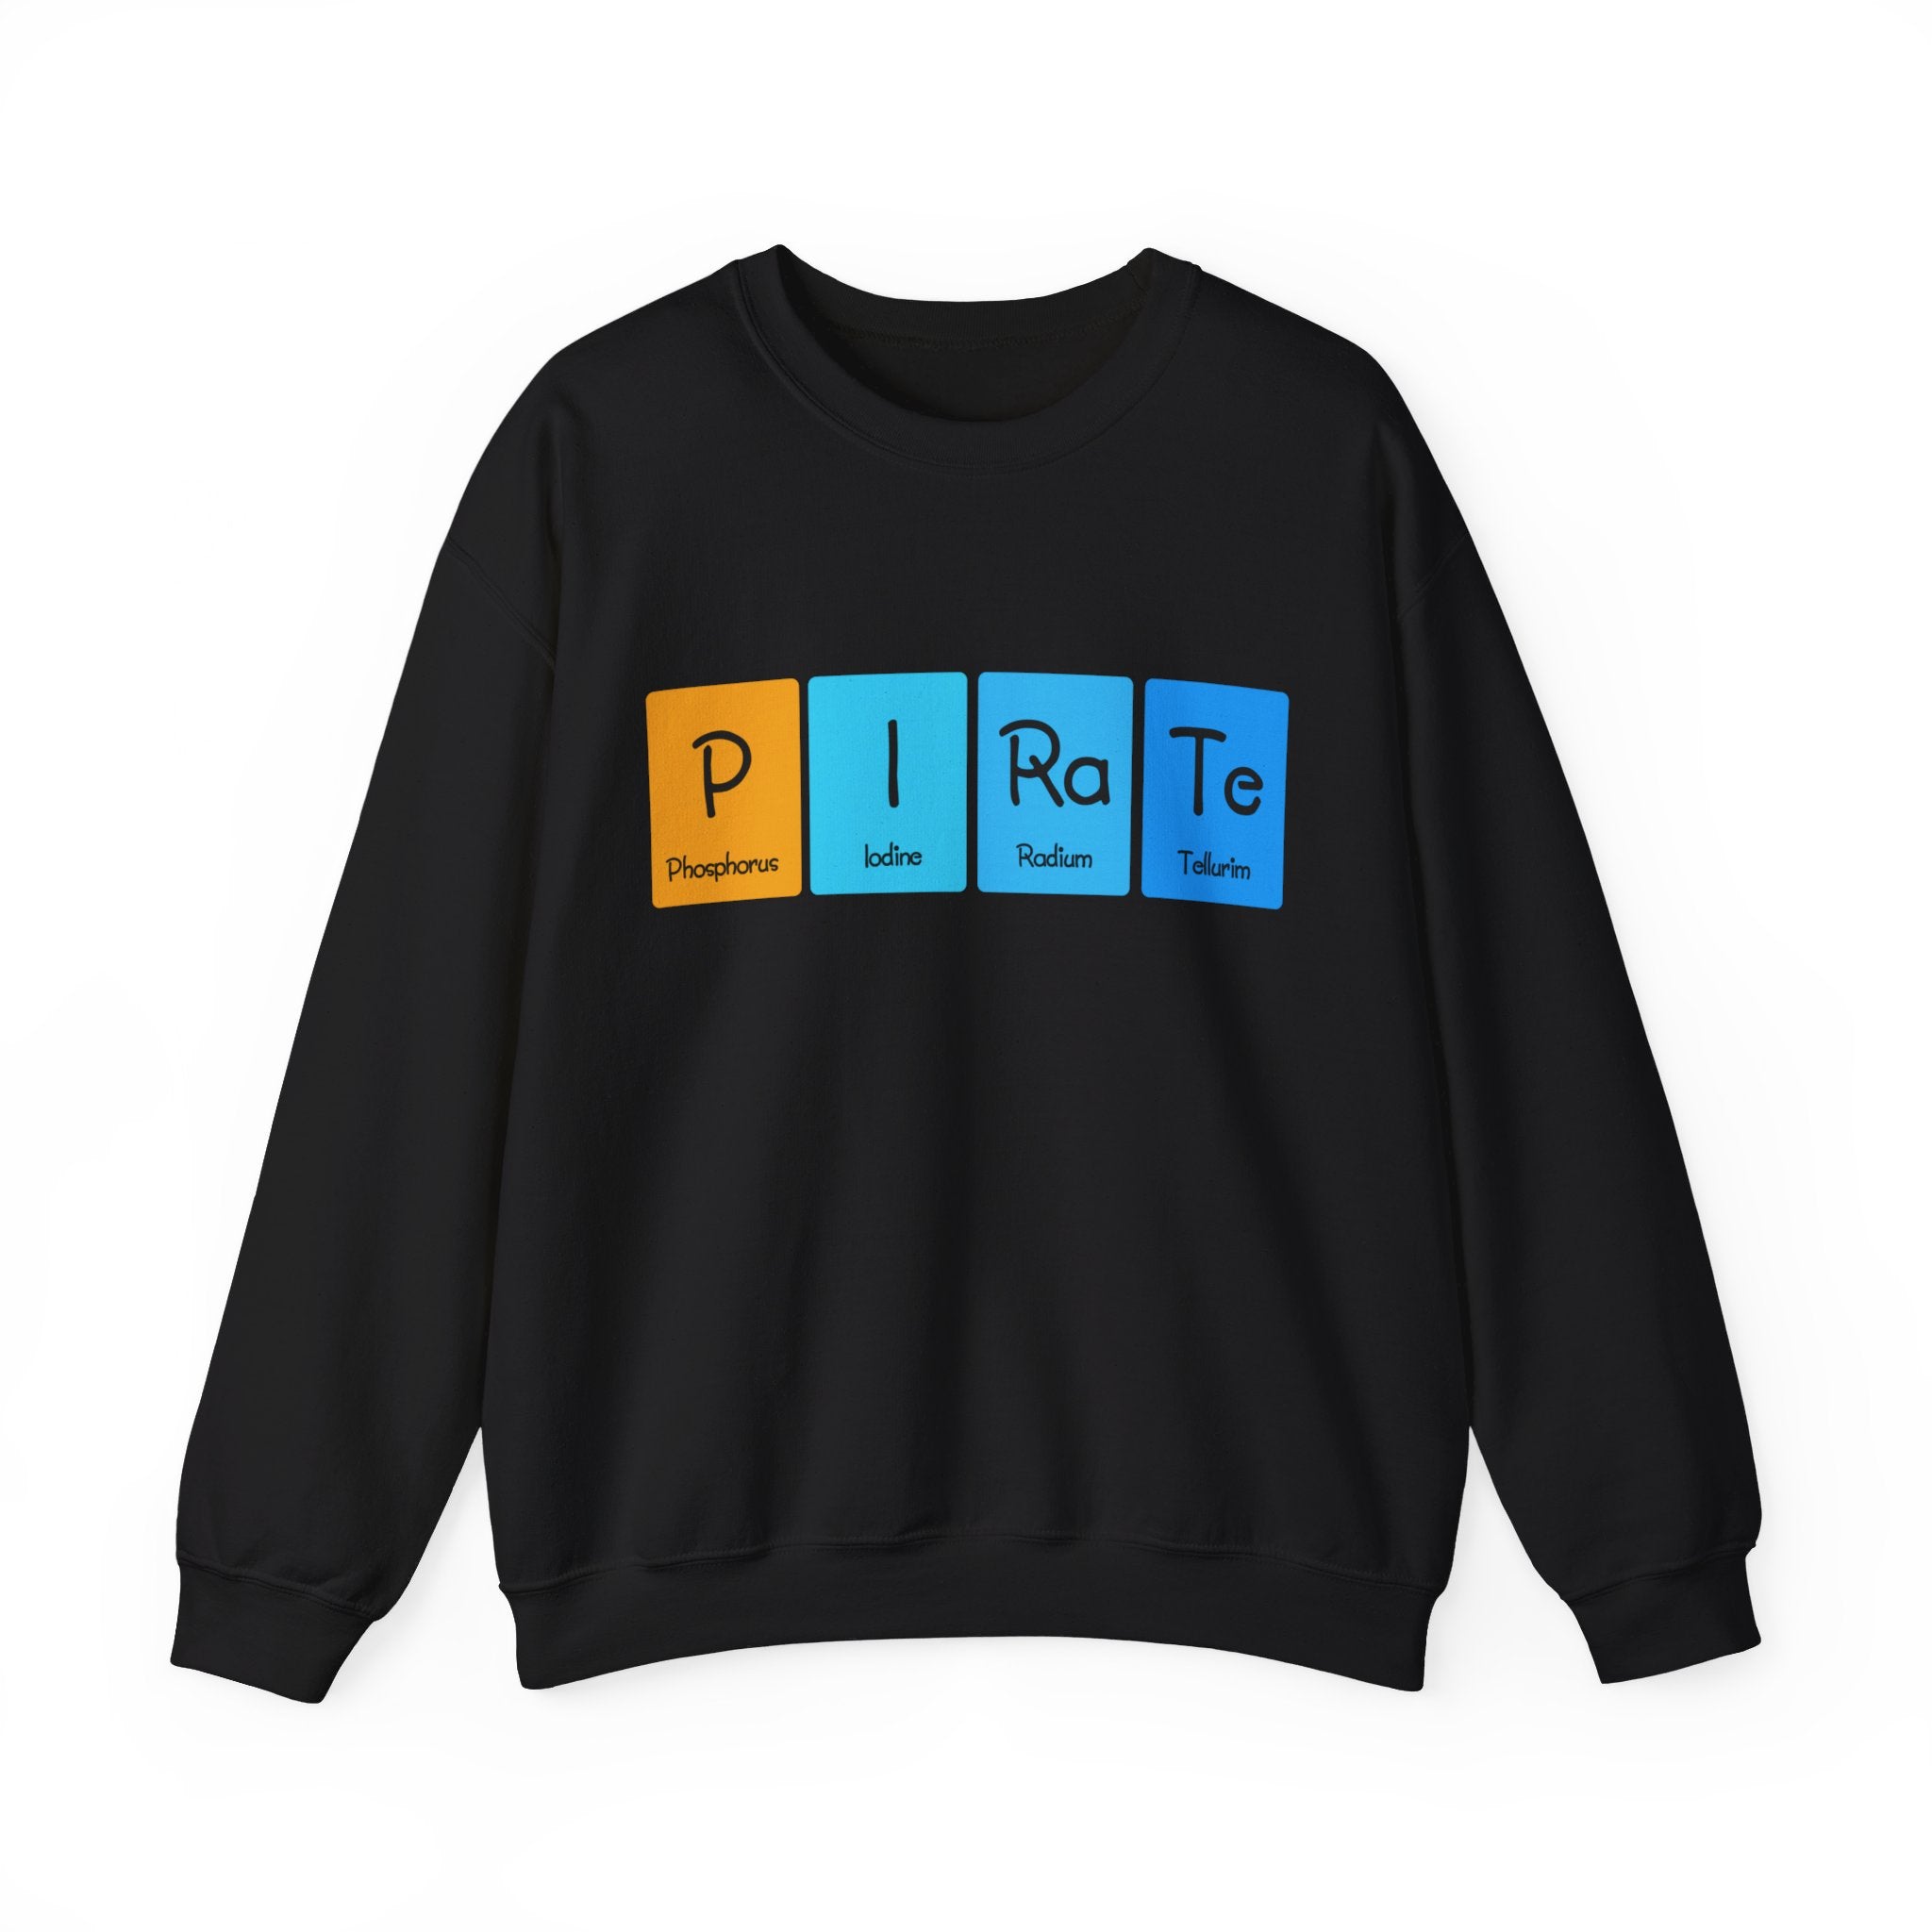 A P-I-Ra-Te - Sweatshirt with the word "PIRATE" spelled out using chemical element symbols: Phosphorus (P), Iodine (I), Radium (Ra), and Tellurium (Te). The cozy design is perfect for colder months.